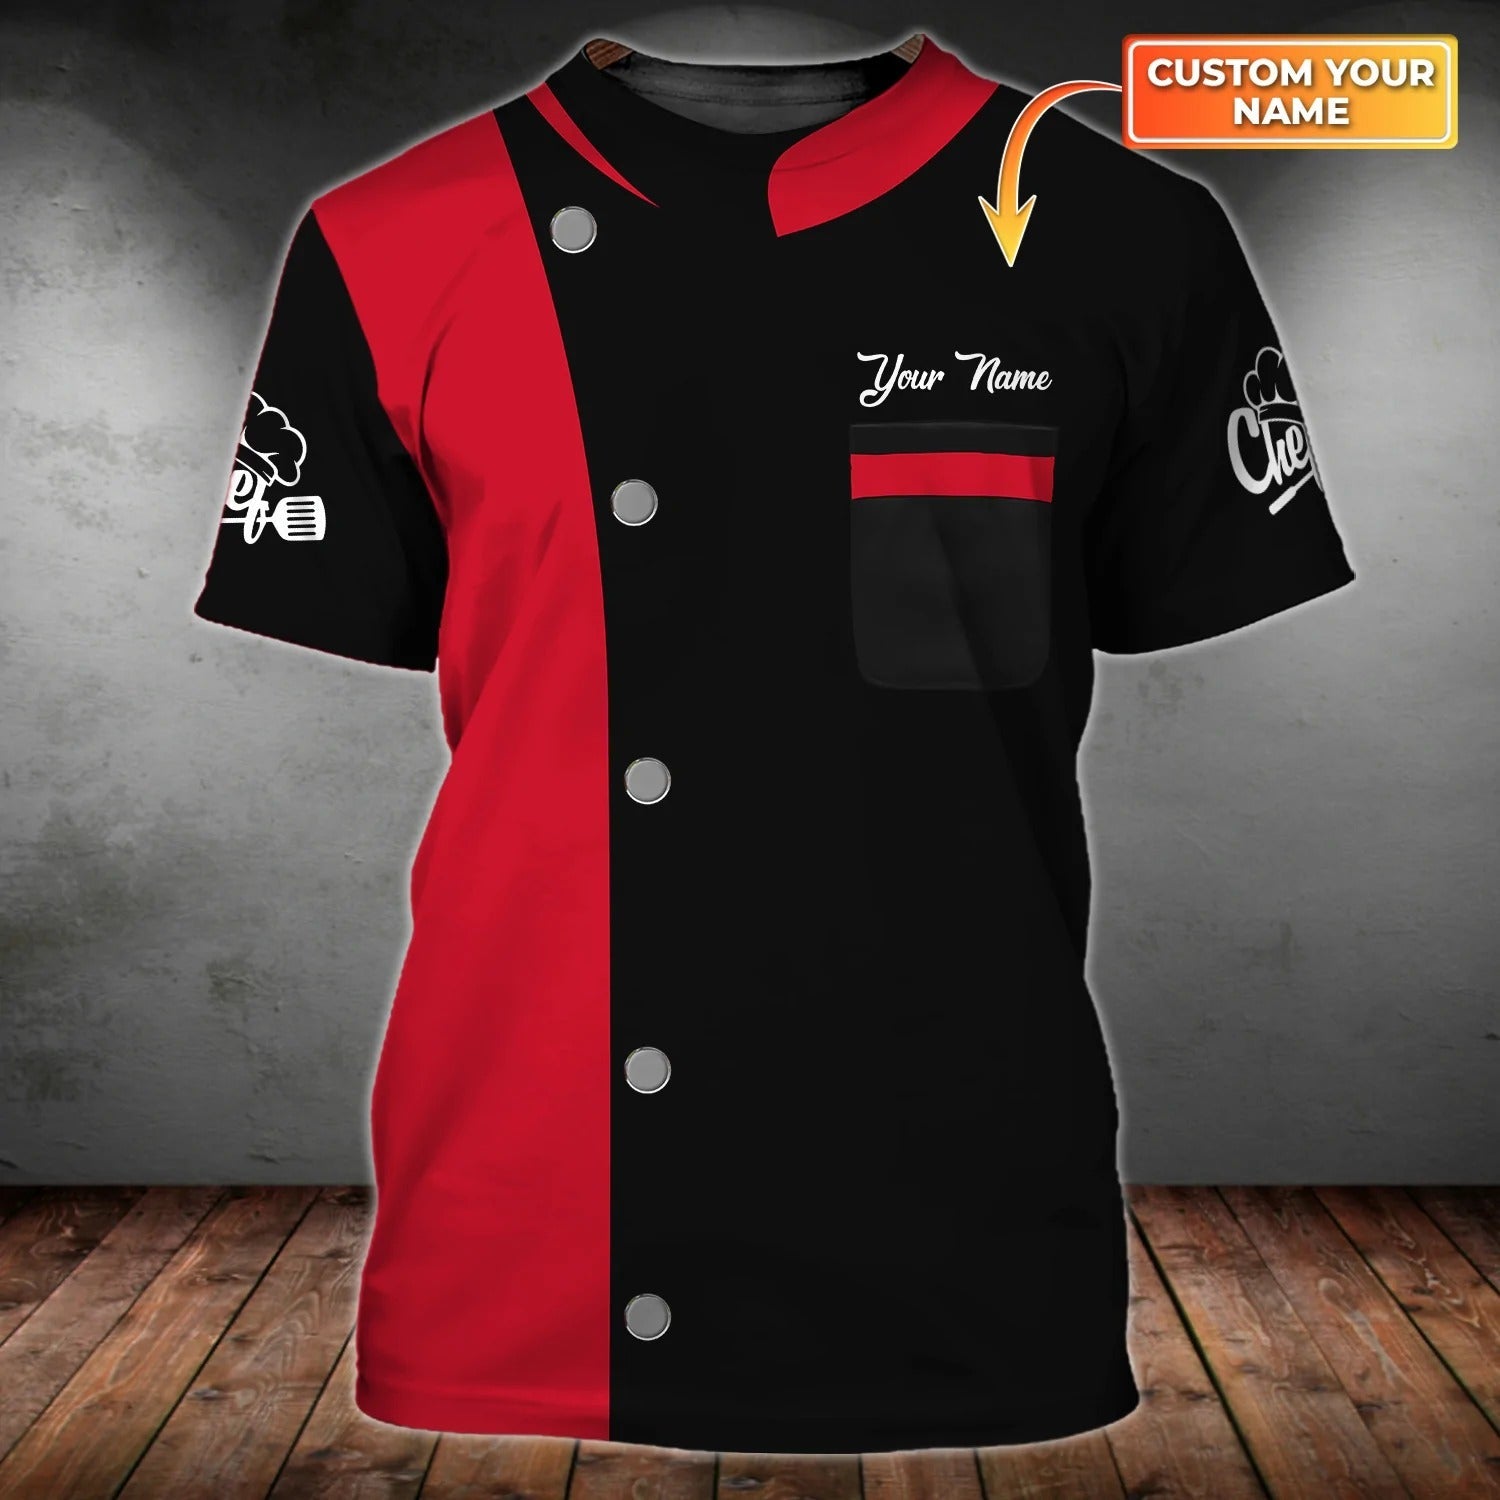 Custom Name Black And Red T Shirt For Master Chef/ Best Gift For A Chef/ Chef Shirt For Men Women